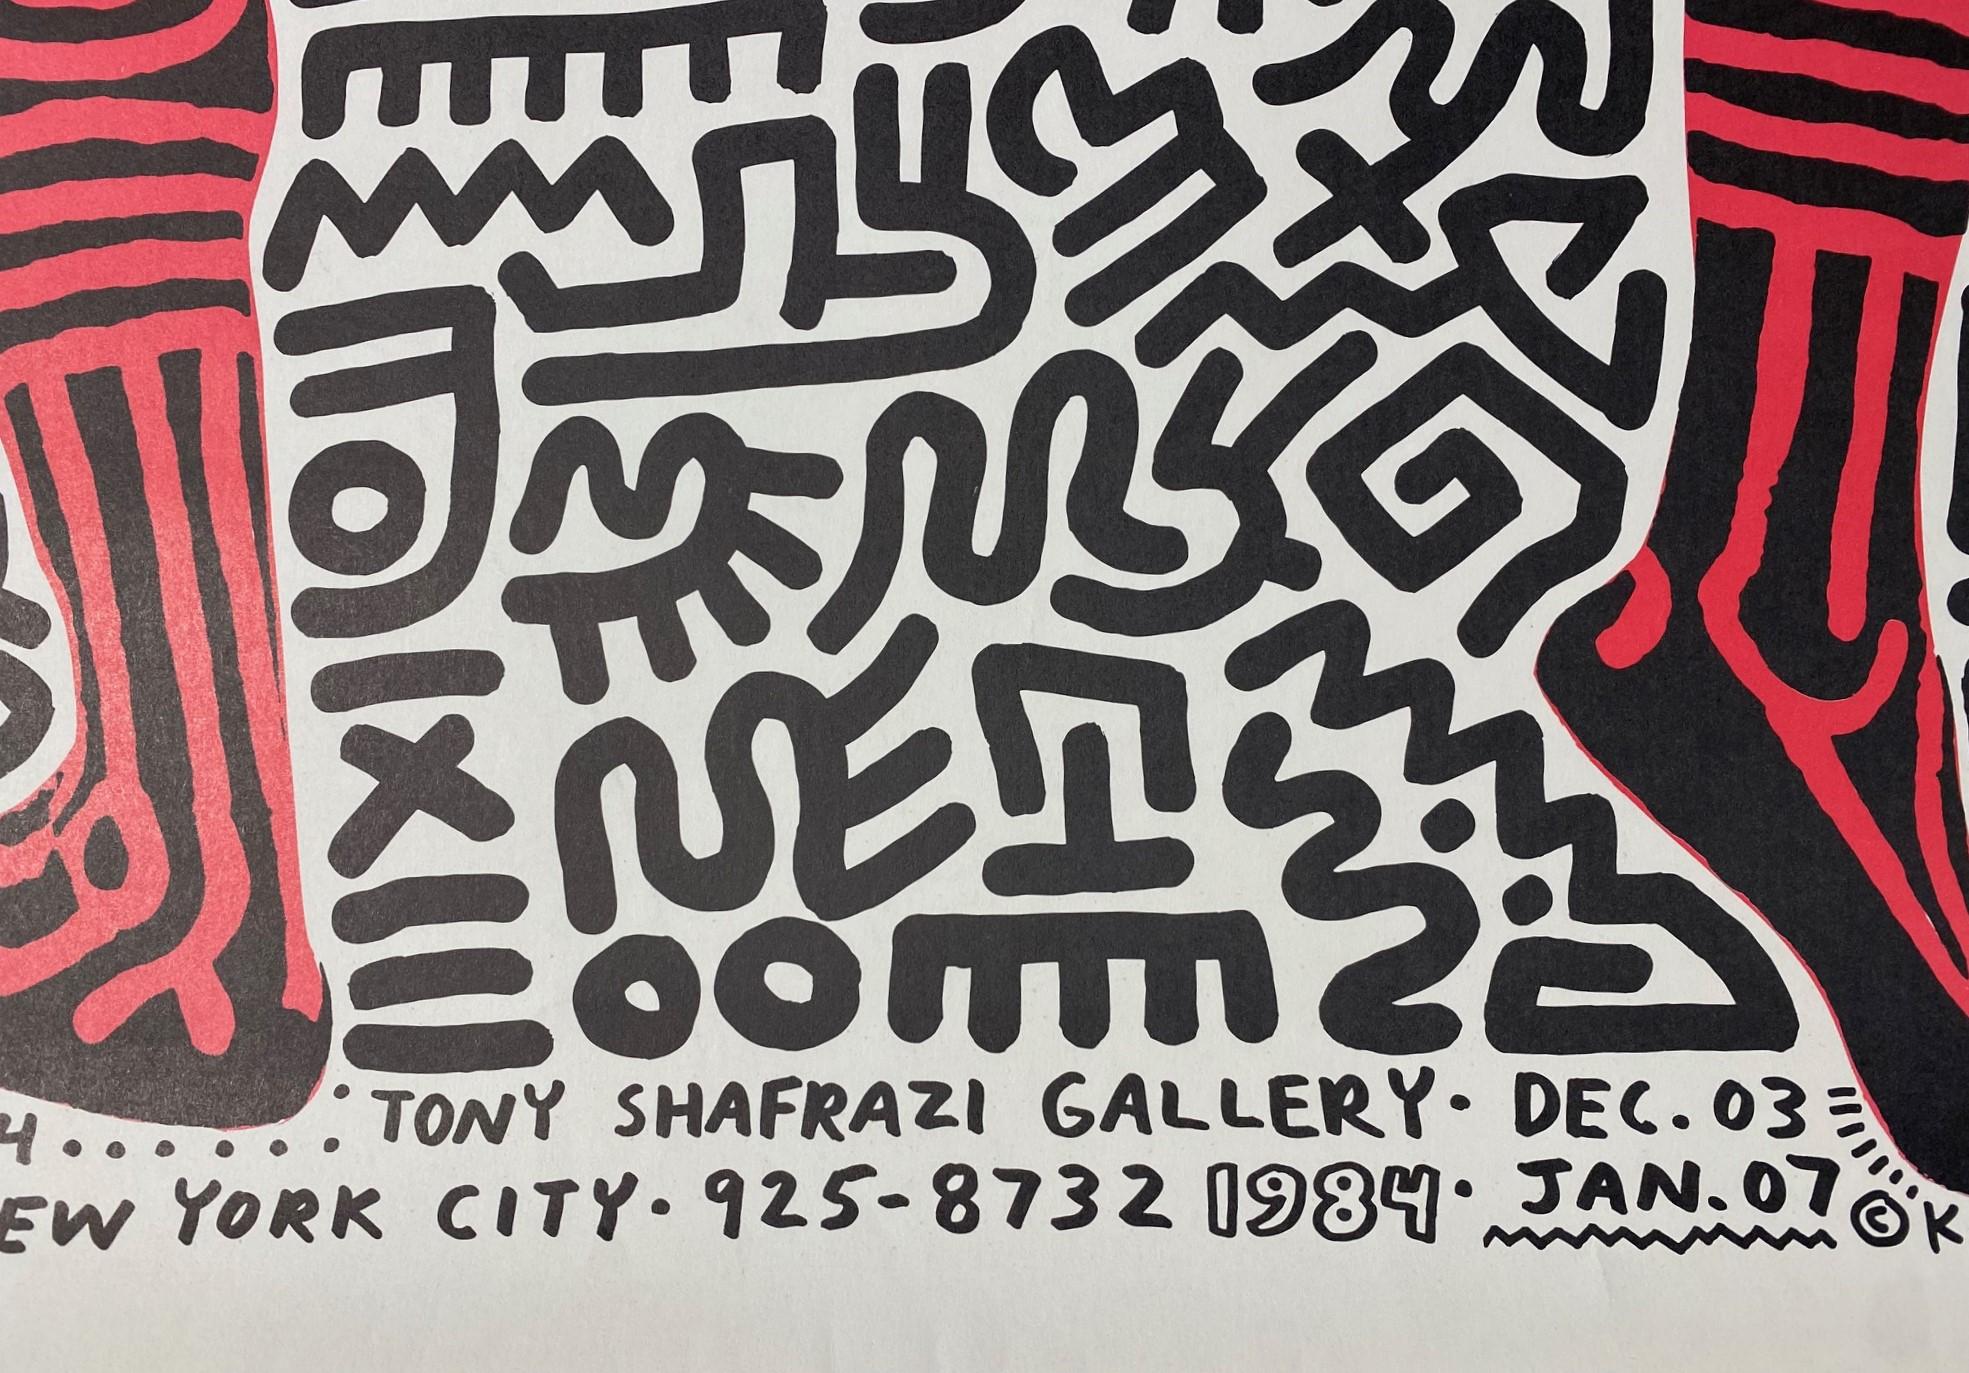 Keith Haring Lithographie signée Tony Shafrazi Gallery Exhibition Poster Into 84 en vente 2